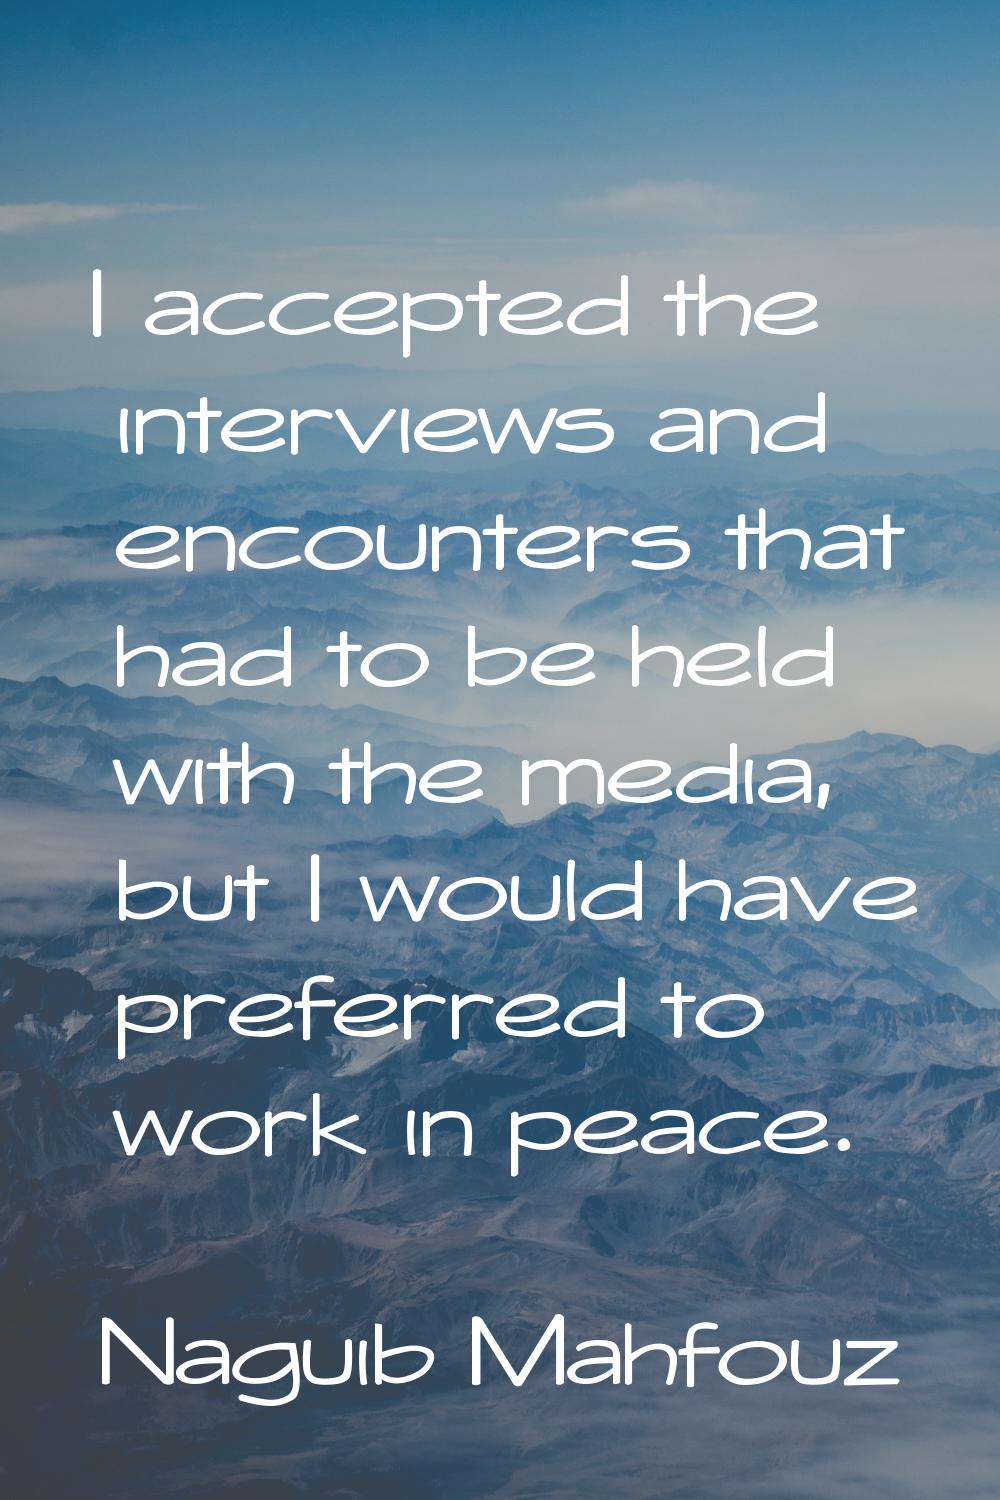 I accepted the interviews and encounters that had to be held with the media, but I would have prefe